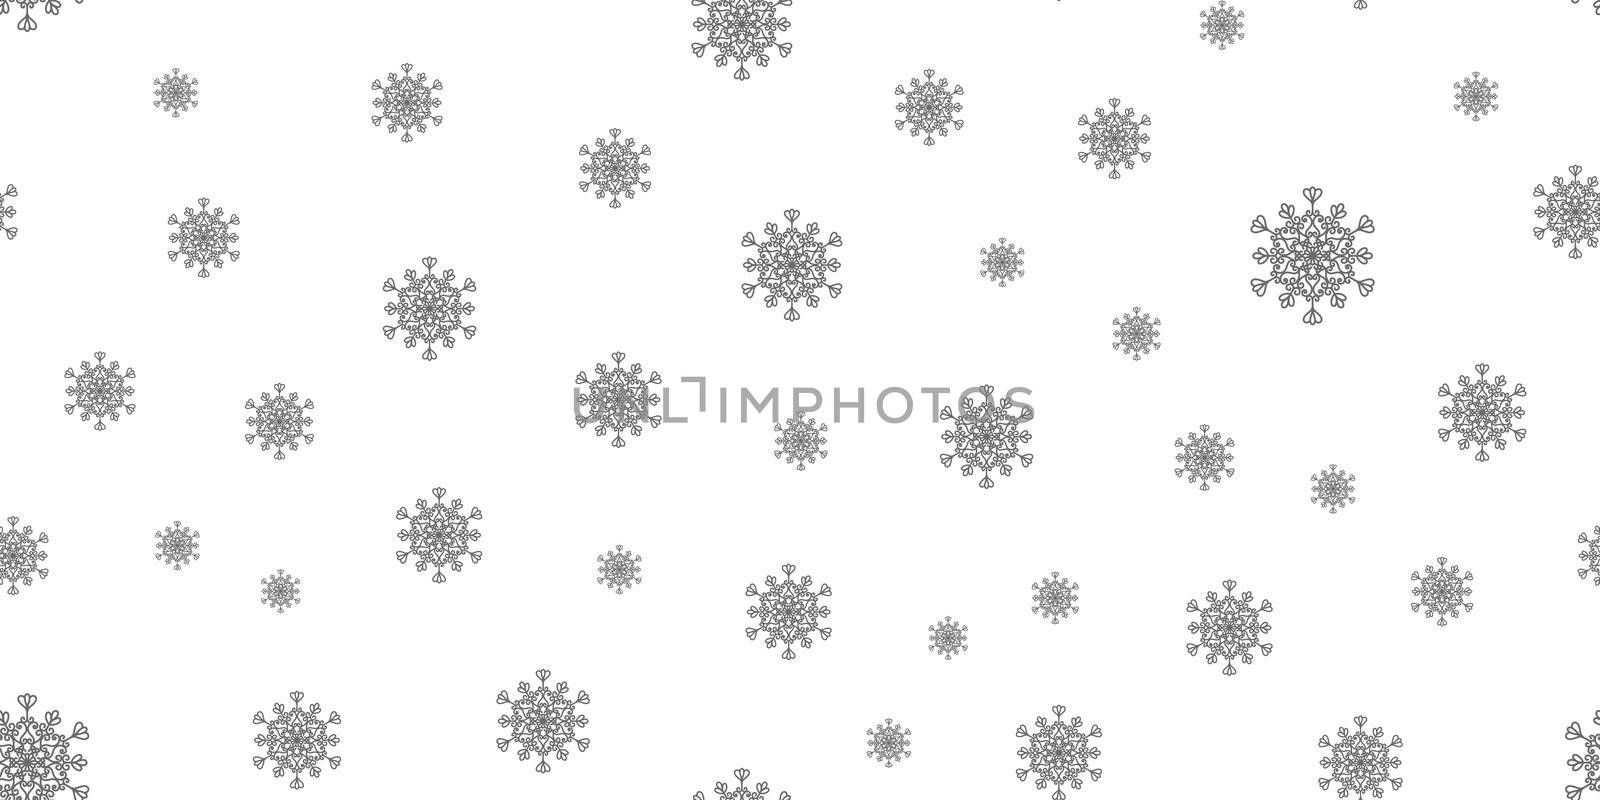 Winter seamless pattern with grey snowflakes on white background. Vector illustration for fabric, textile wallpaper, posters, gift wrapping paper. Christmas vector illustration. Falling snow.